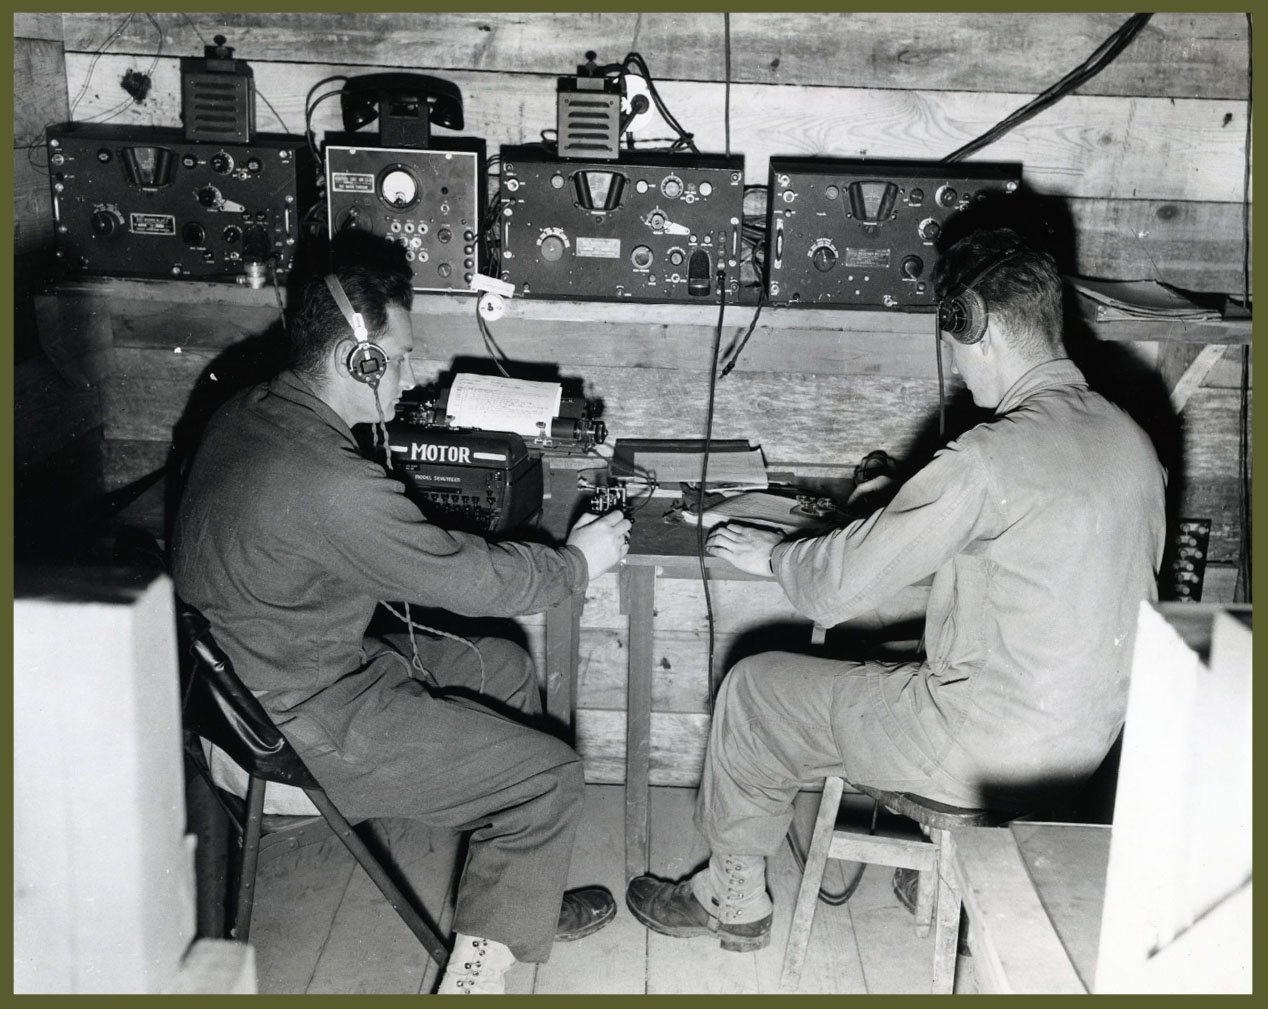 Radio shack in a foxhole at the Omaha beach command